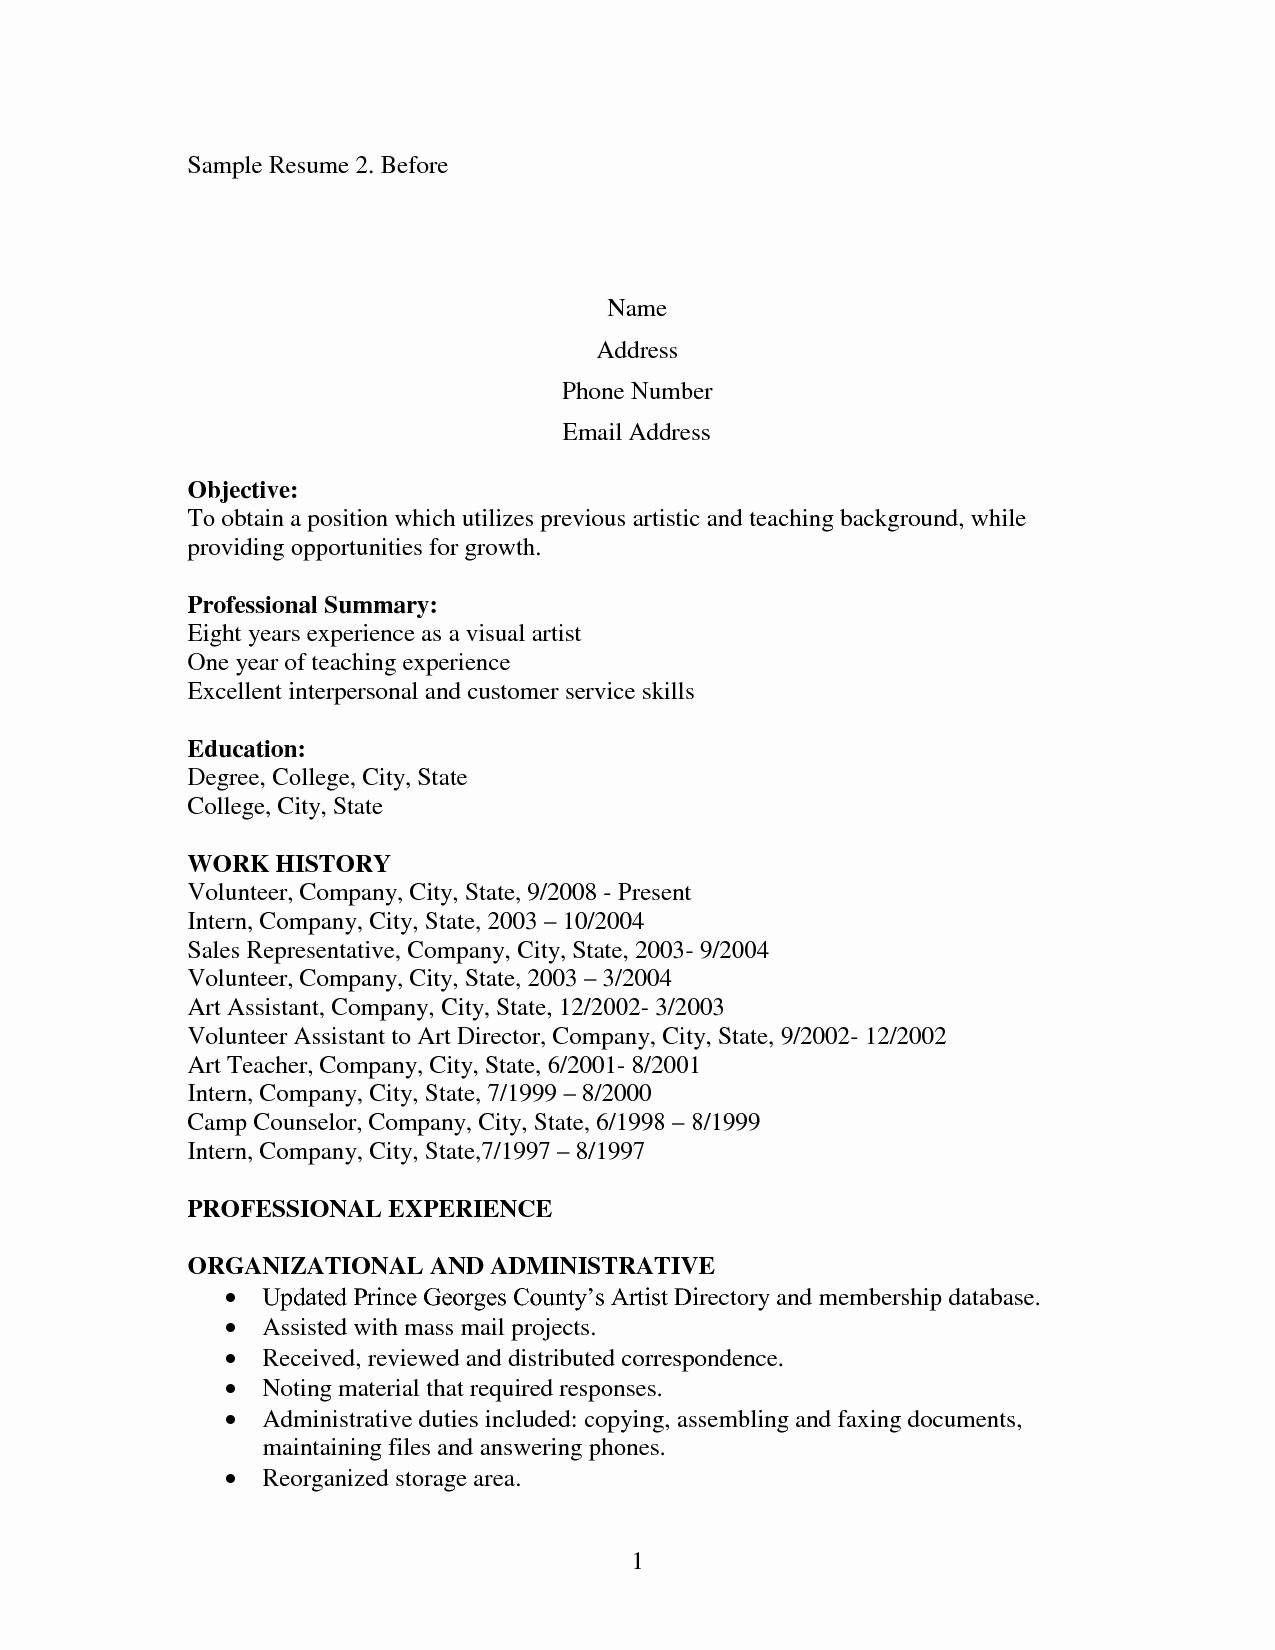 sample resume for housewife returning to work sample resume for housewife returning to work sample